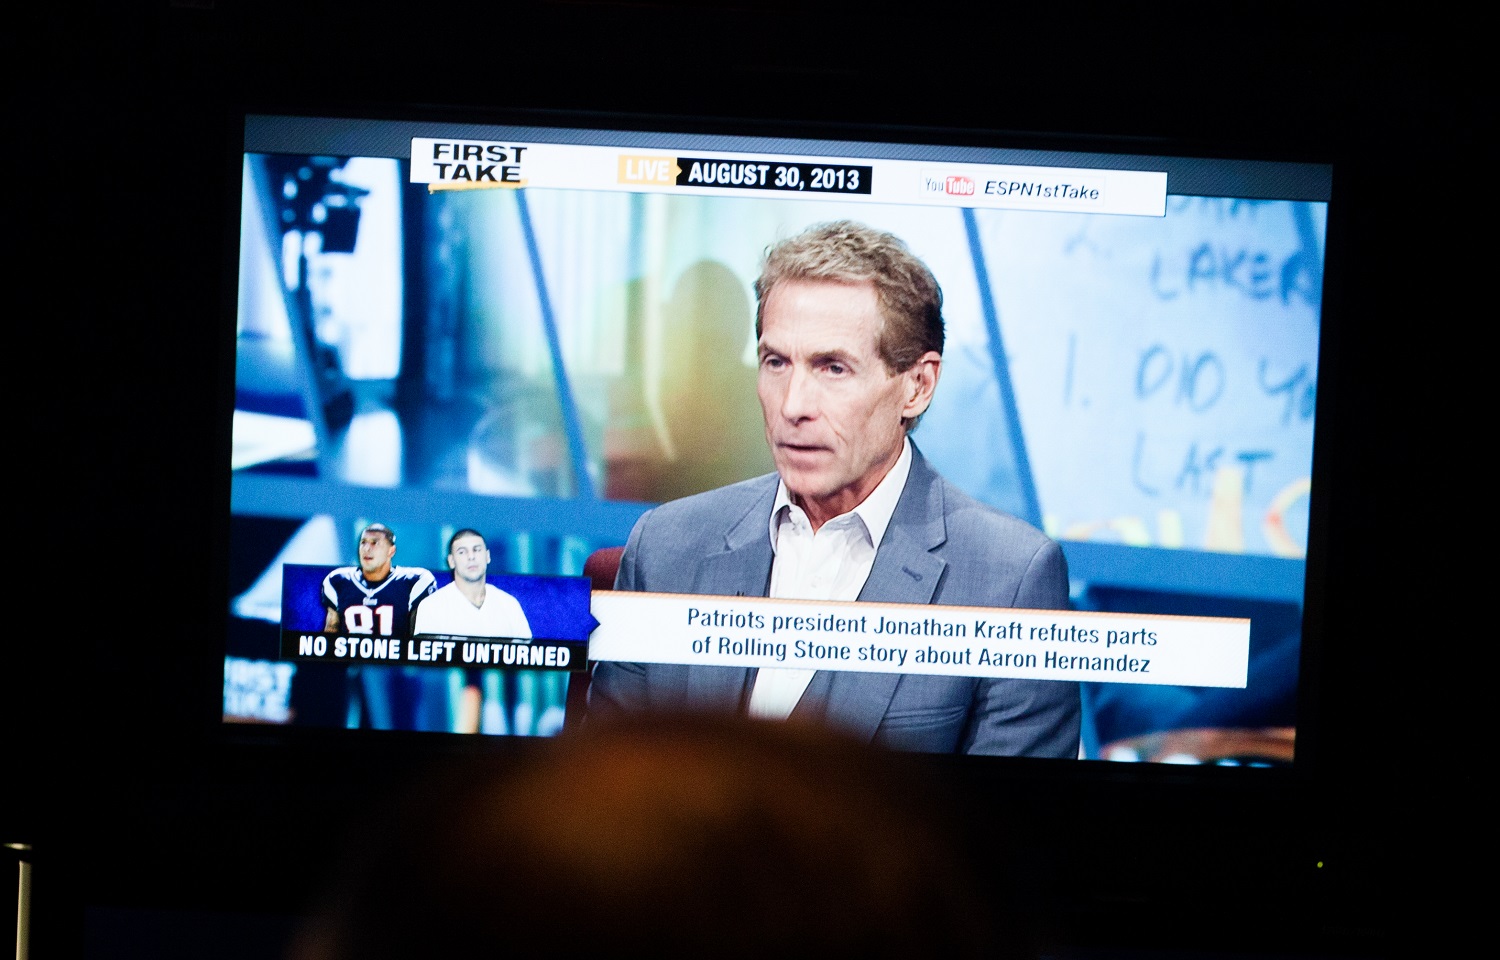 Sports journalist and TV personality, Skip Bayless moved from ESPN to Fox Sports in 2016.